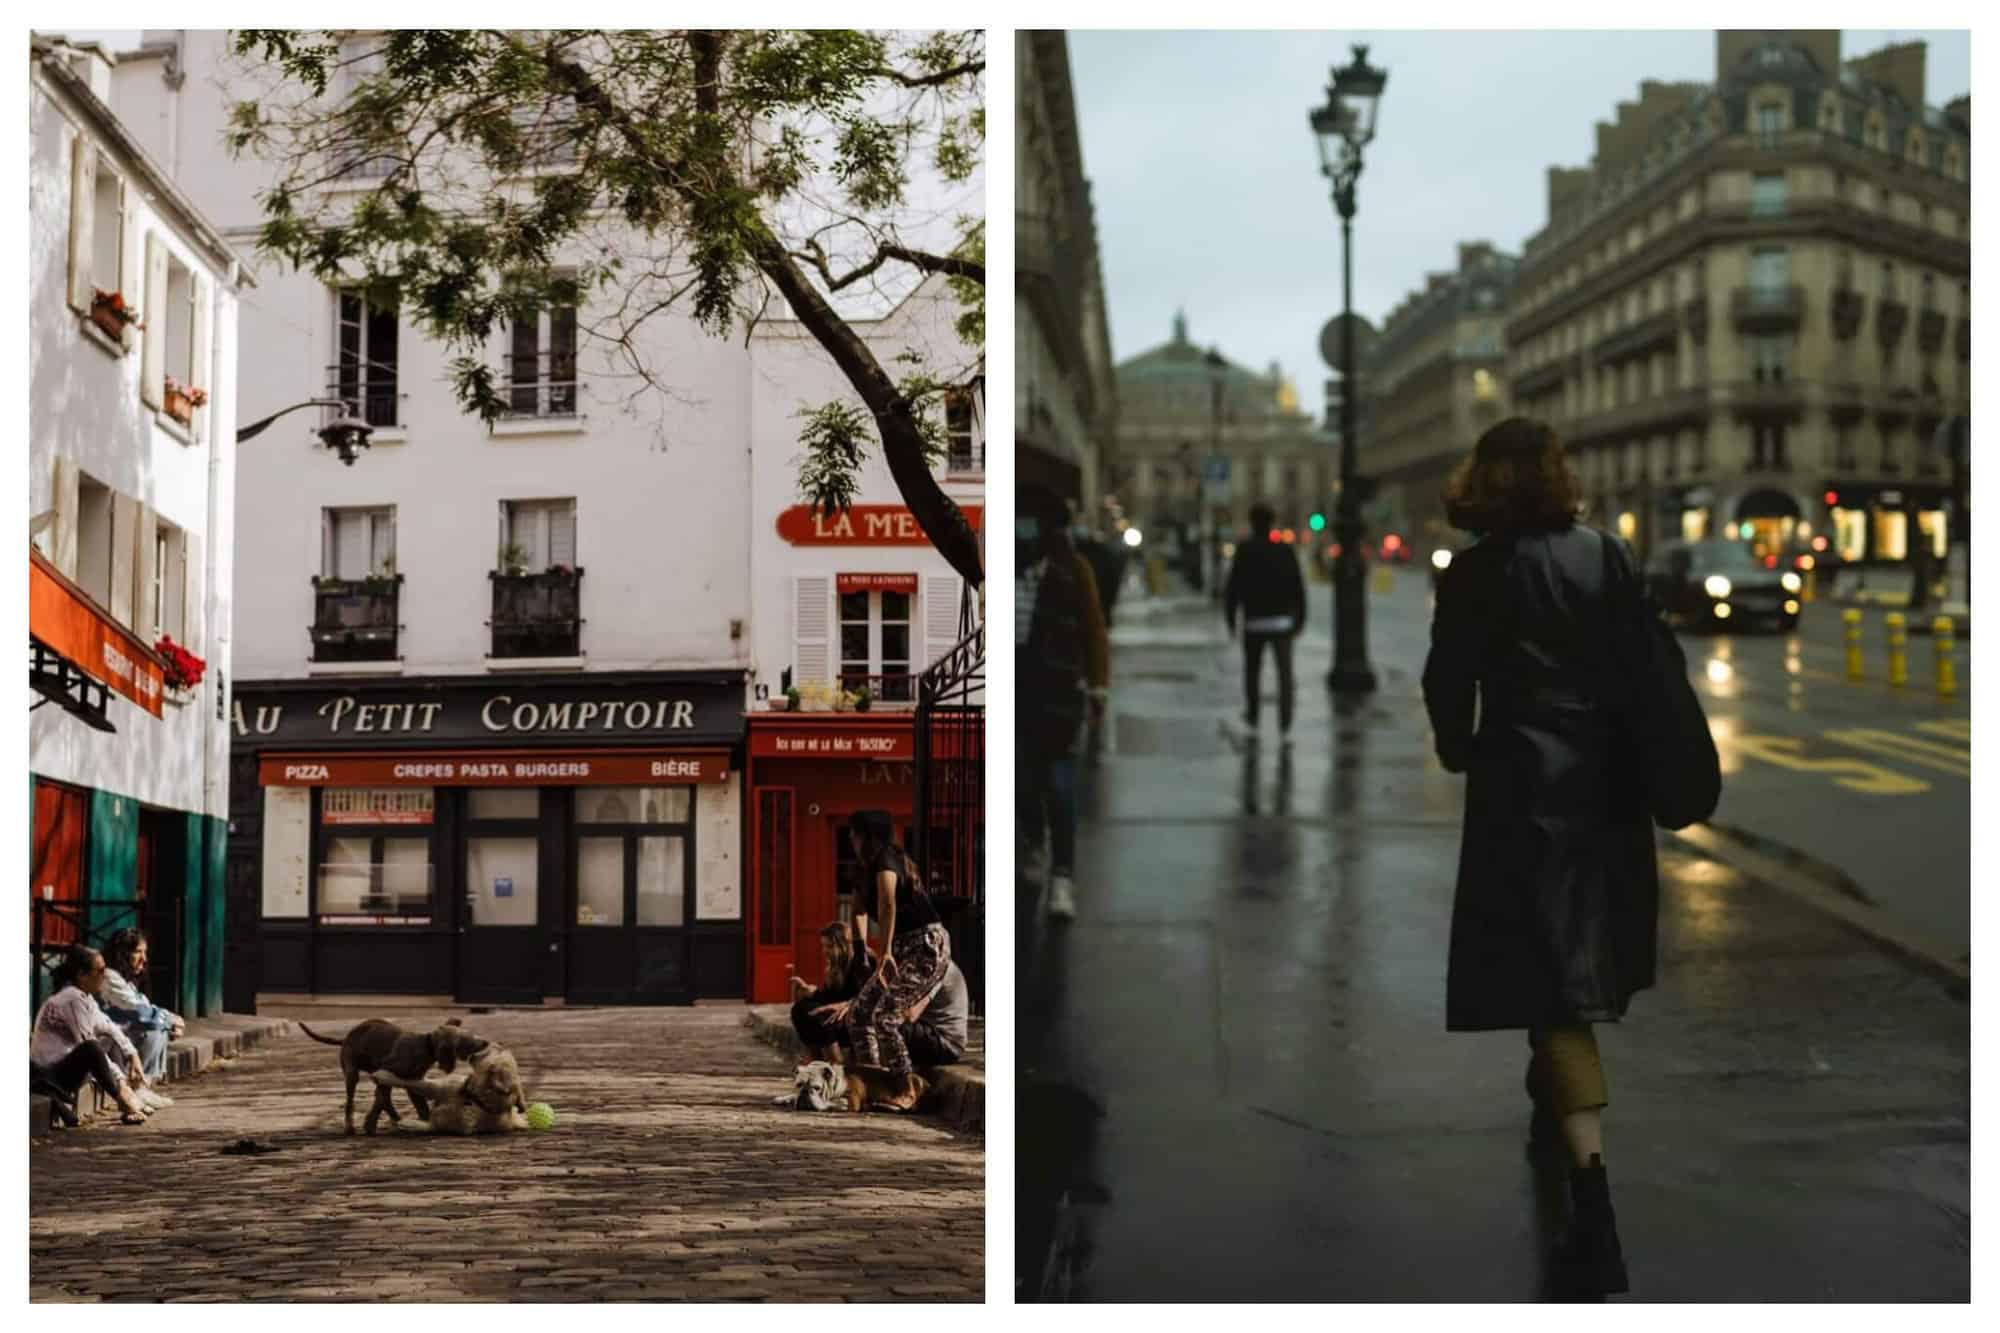 Left: a street in Paris. There are groups of two people sitting across from each other on either side of the street as two dogs play in between them. The street is cobblestoned and there are Parisian cafés visible in the background. Right: A woman walking down the street in Paris in the rain. She has on a black trench coat and only her backside is visible. It is early evening and the Parisian buildings are lit up.